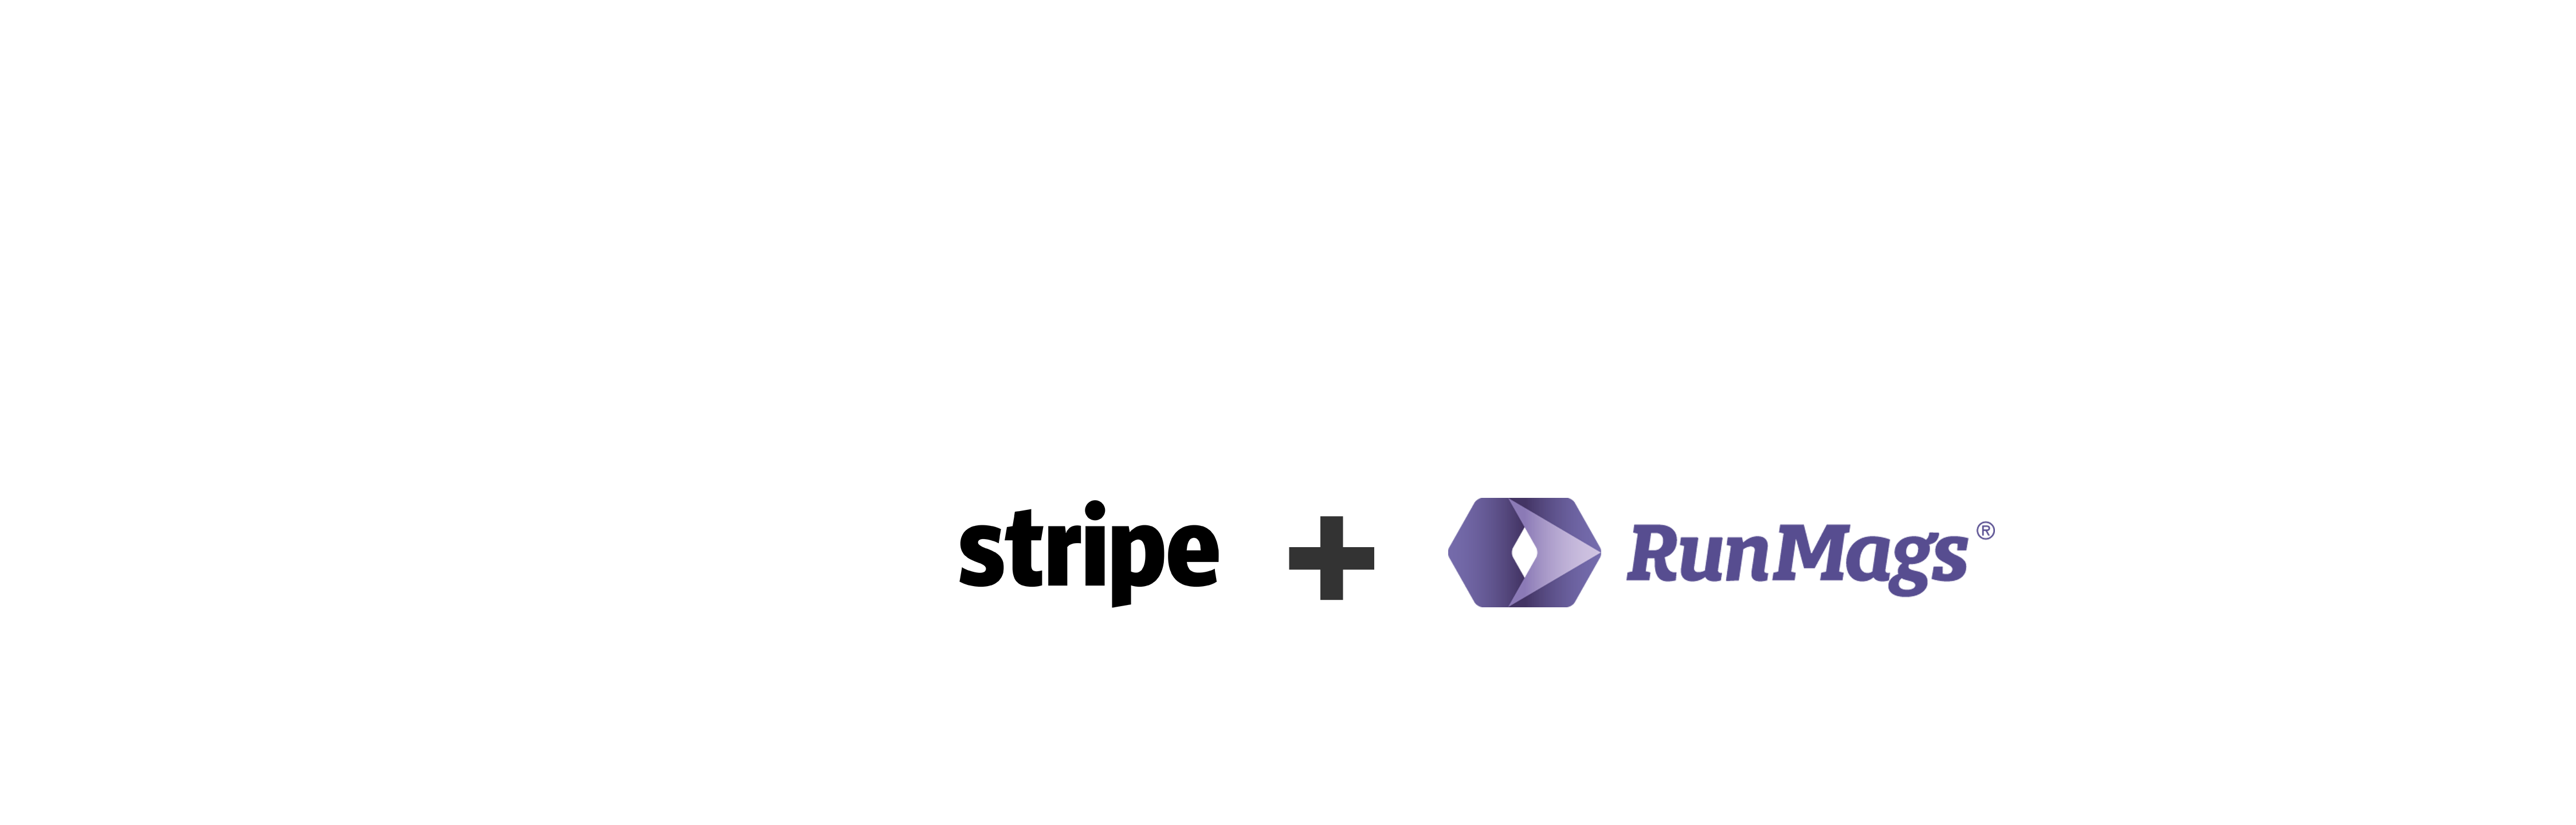 RunMags-Integration-Banner-Stripe.png